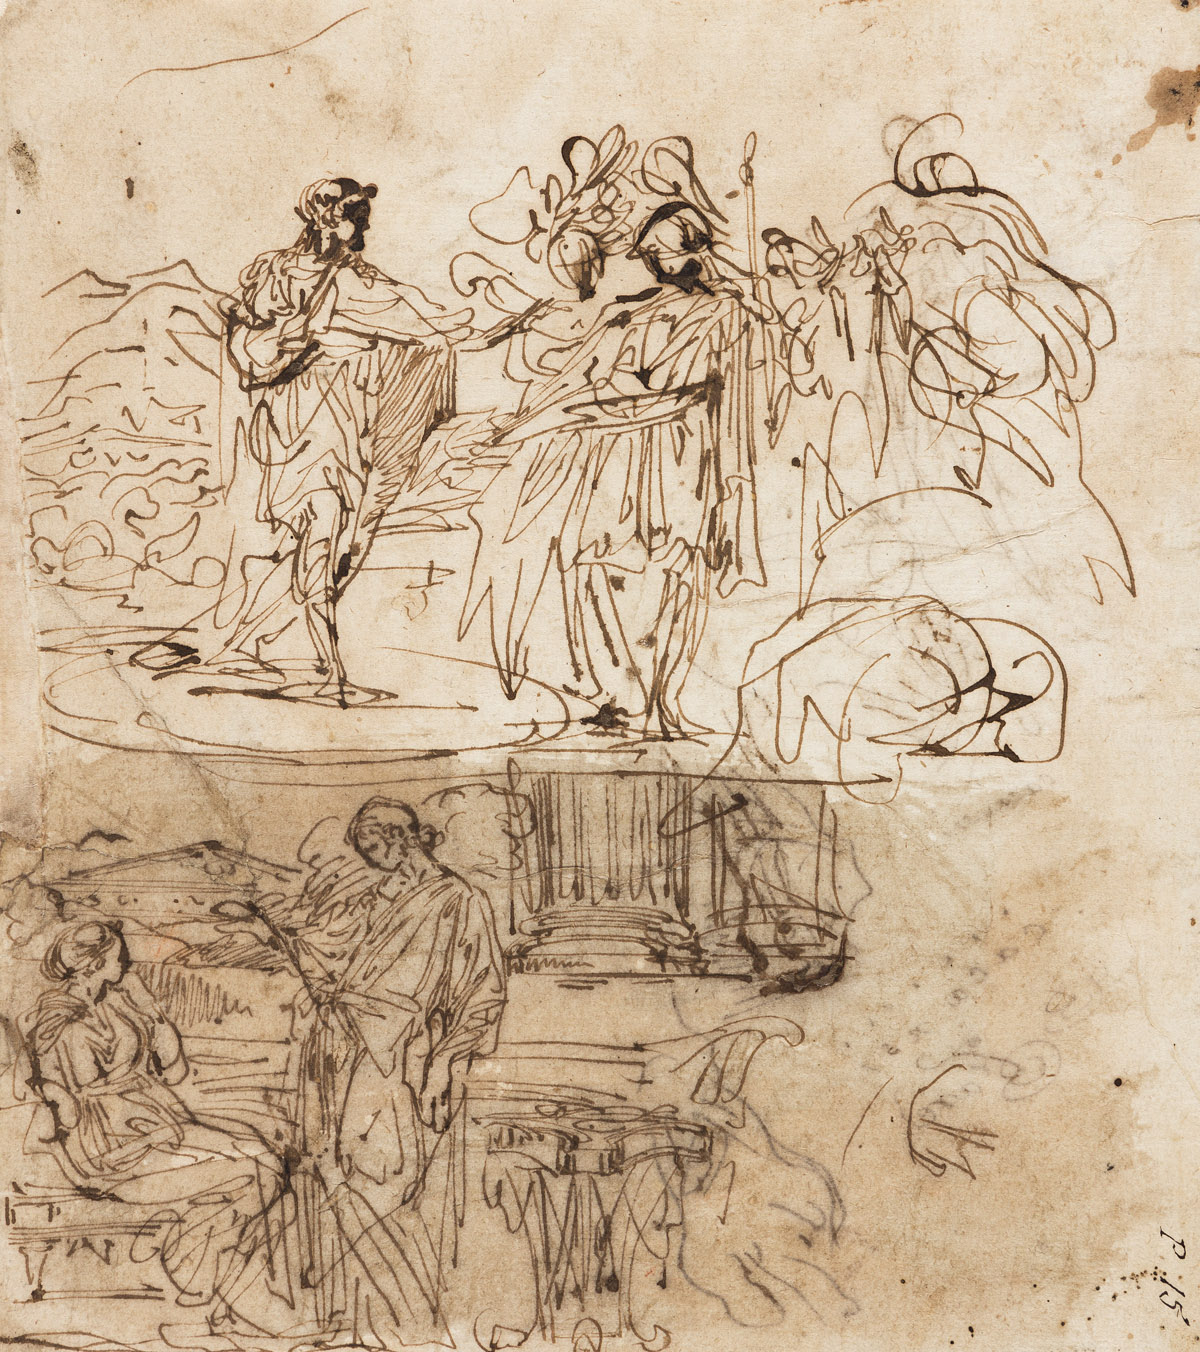 PIER FRANCESCO MOLA (Coldrerio 1612-1666 Rome) Sheet of Studies with Scenes from Antiquity.